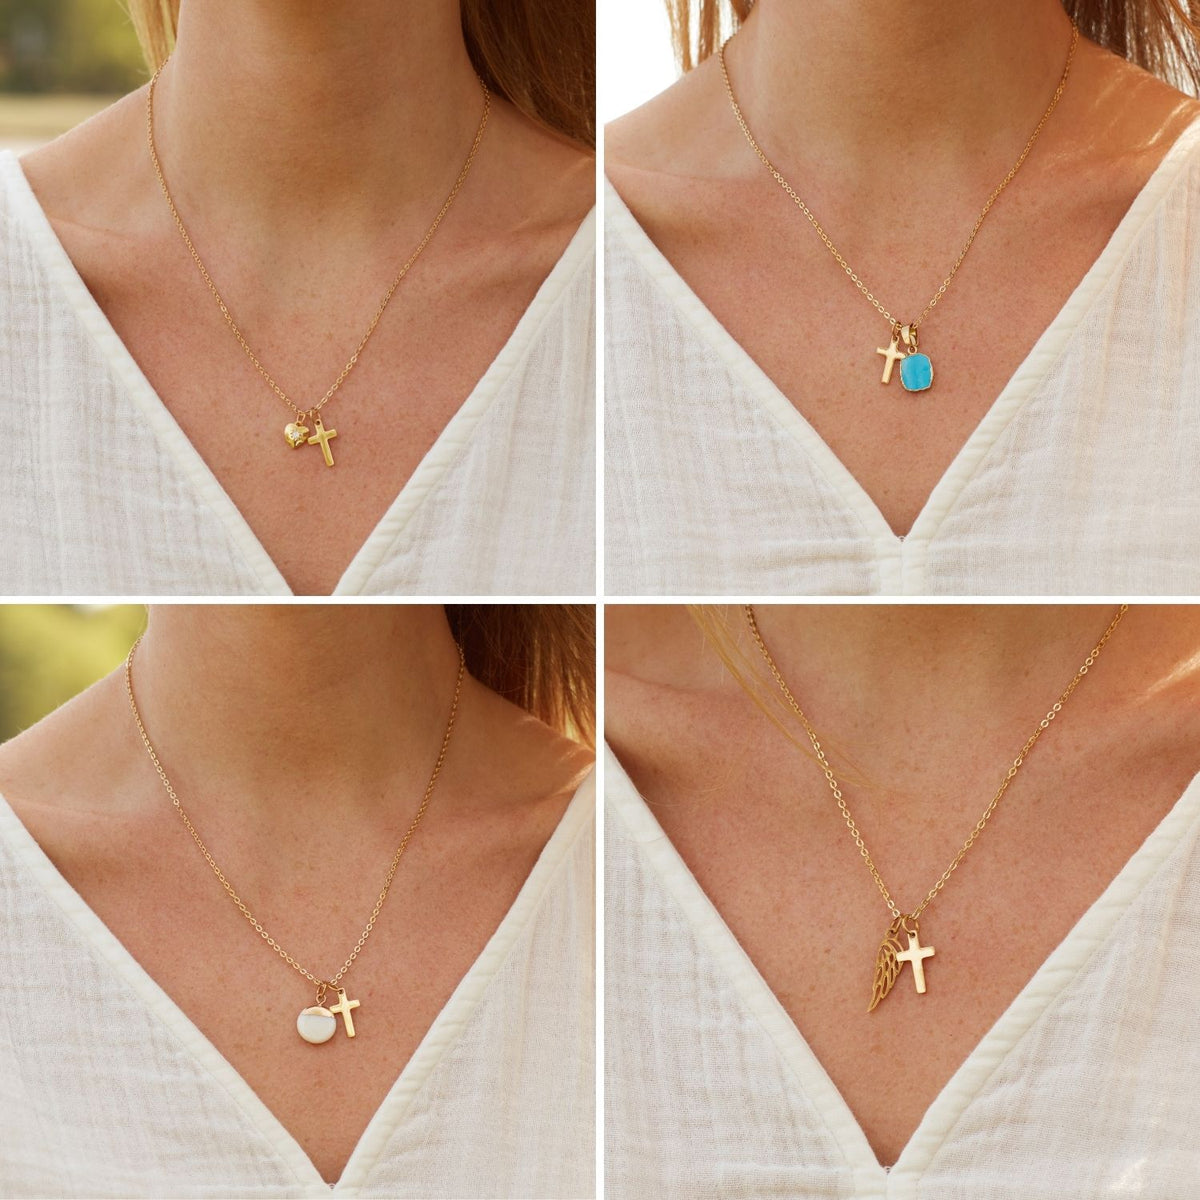 To My Best Friend | Guiding Light in the Darkness | Cross Necklace